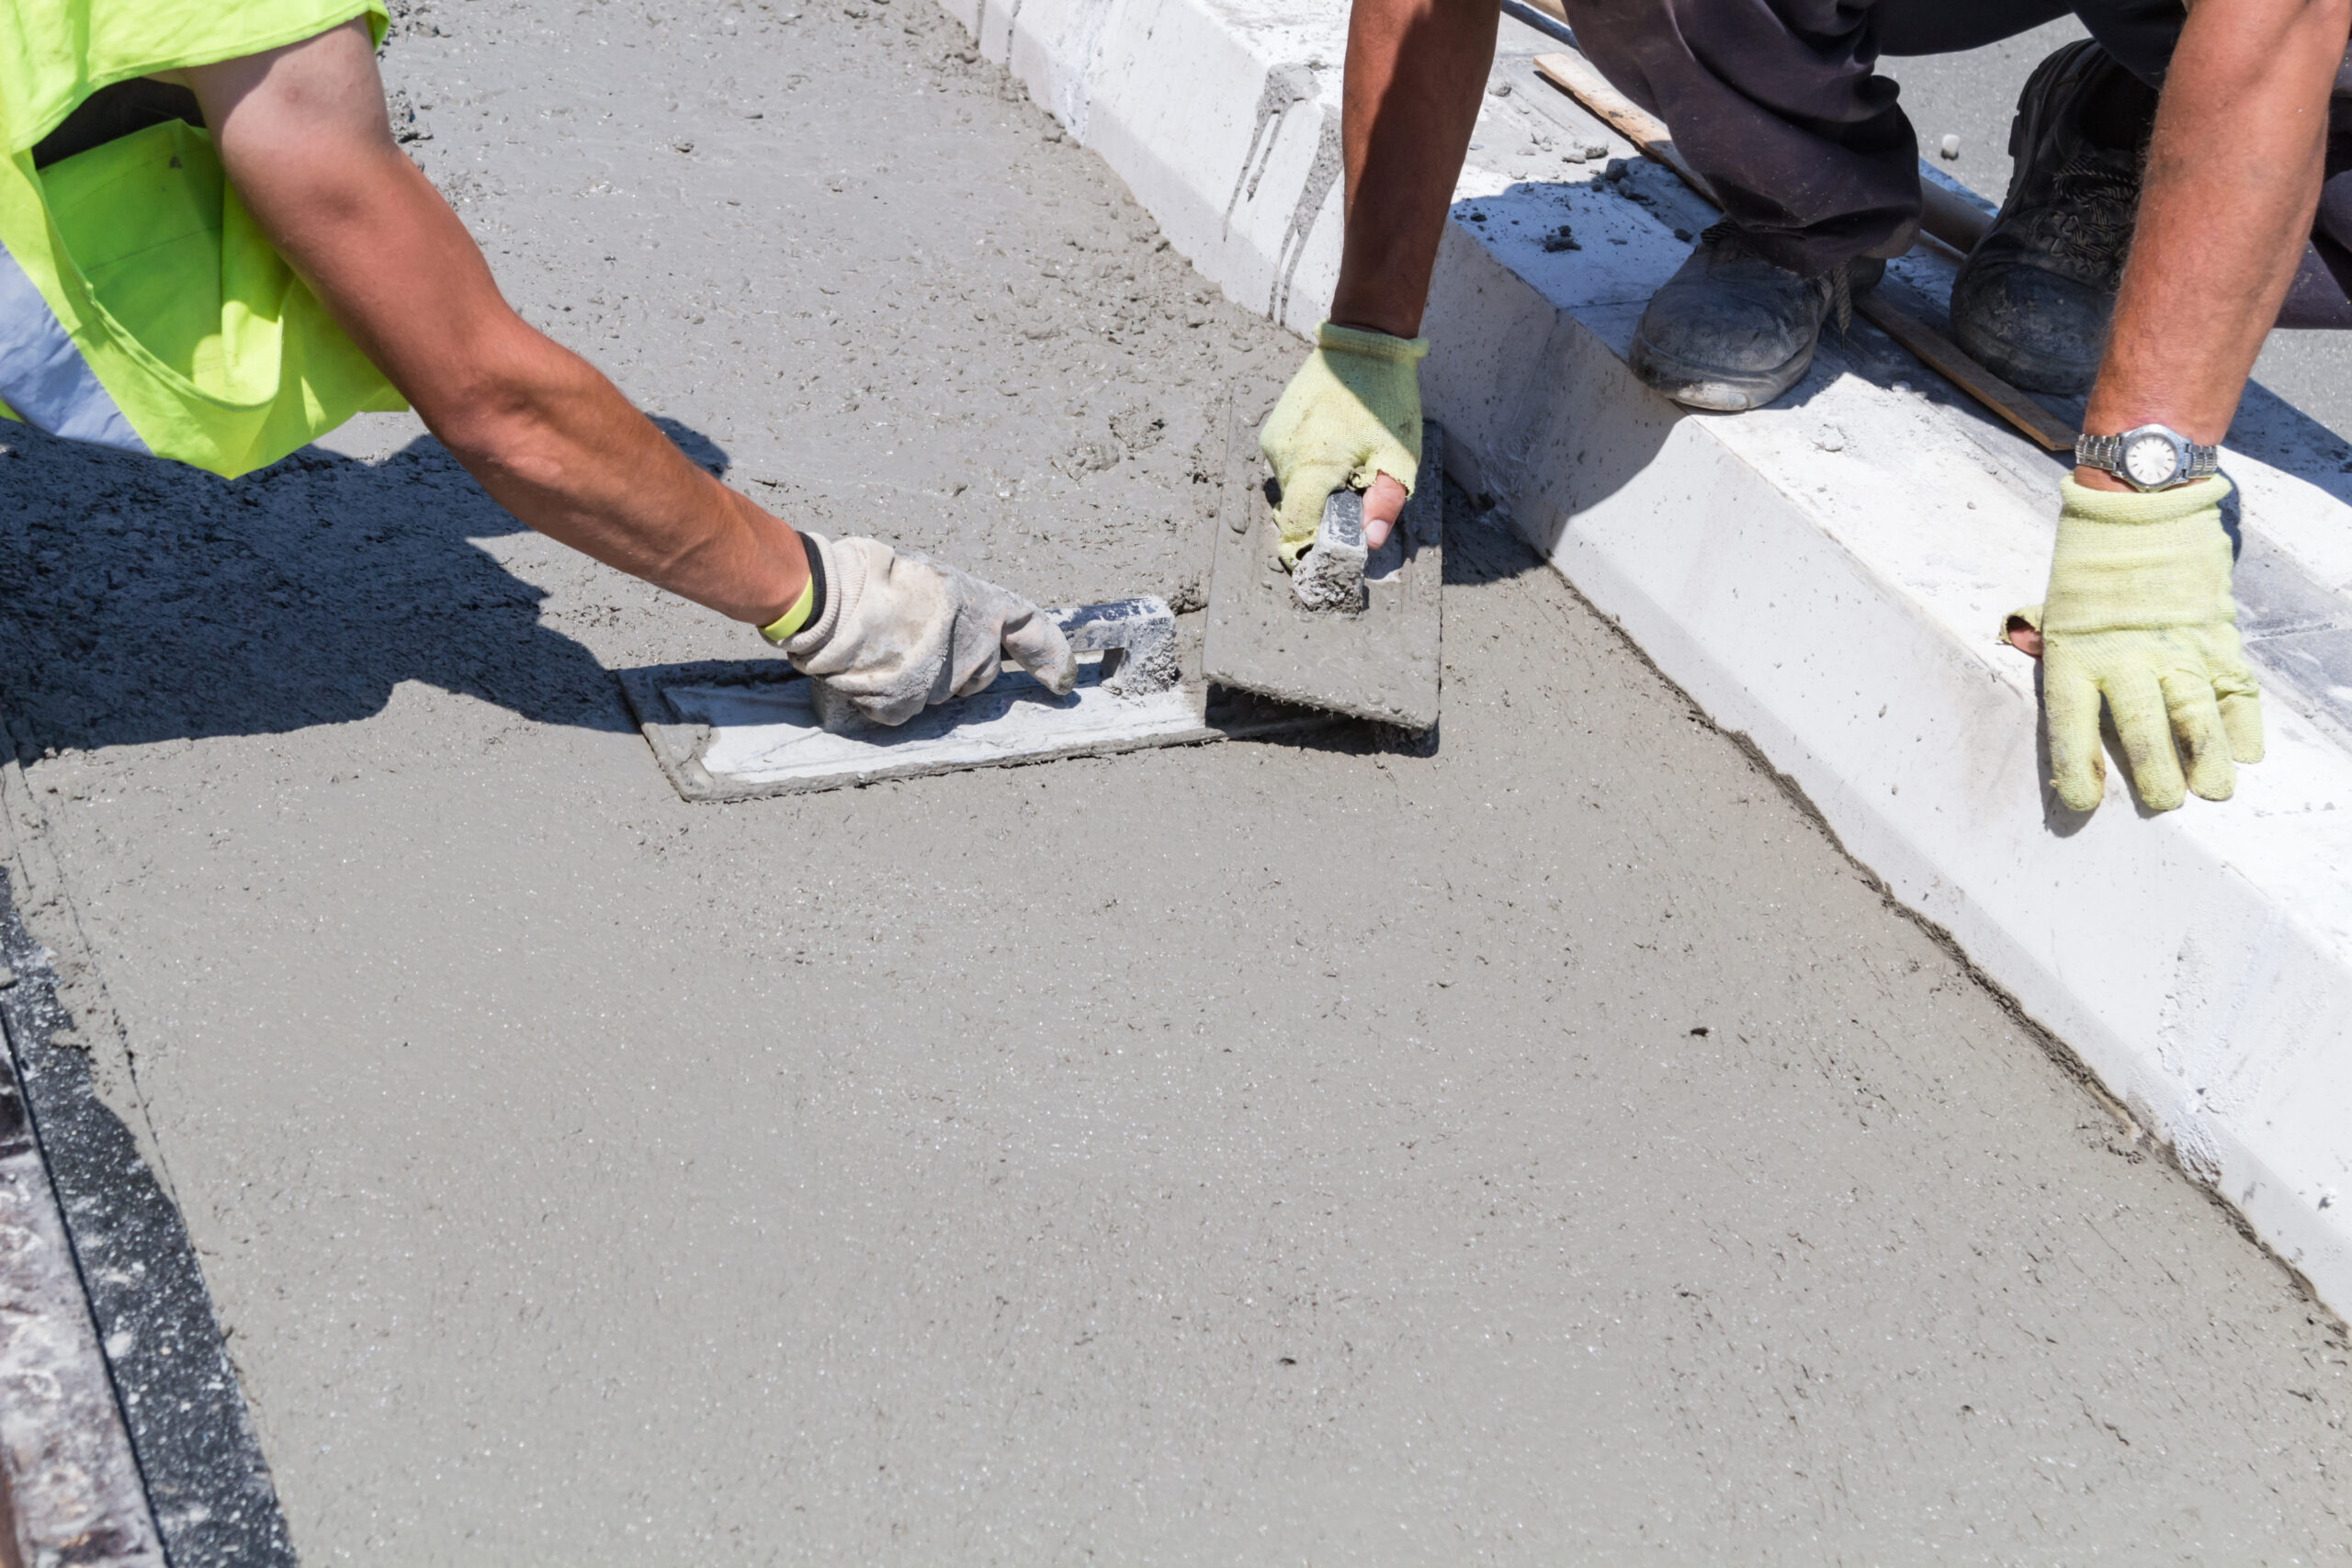 What Is The Ultimate Way Of Installing A Pavement?